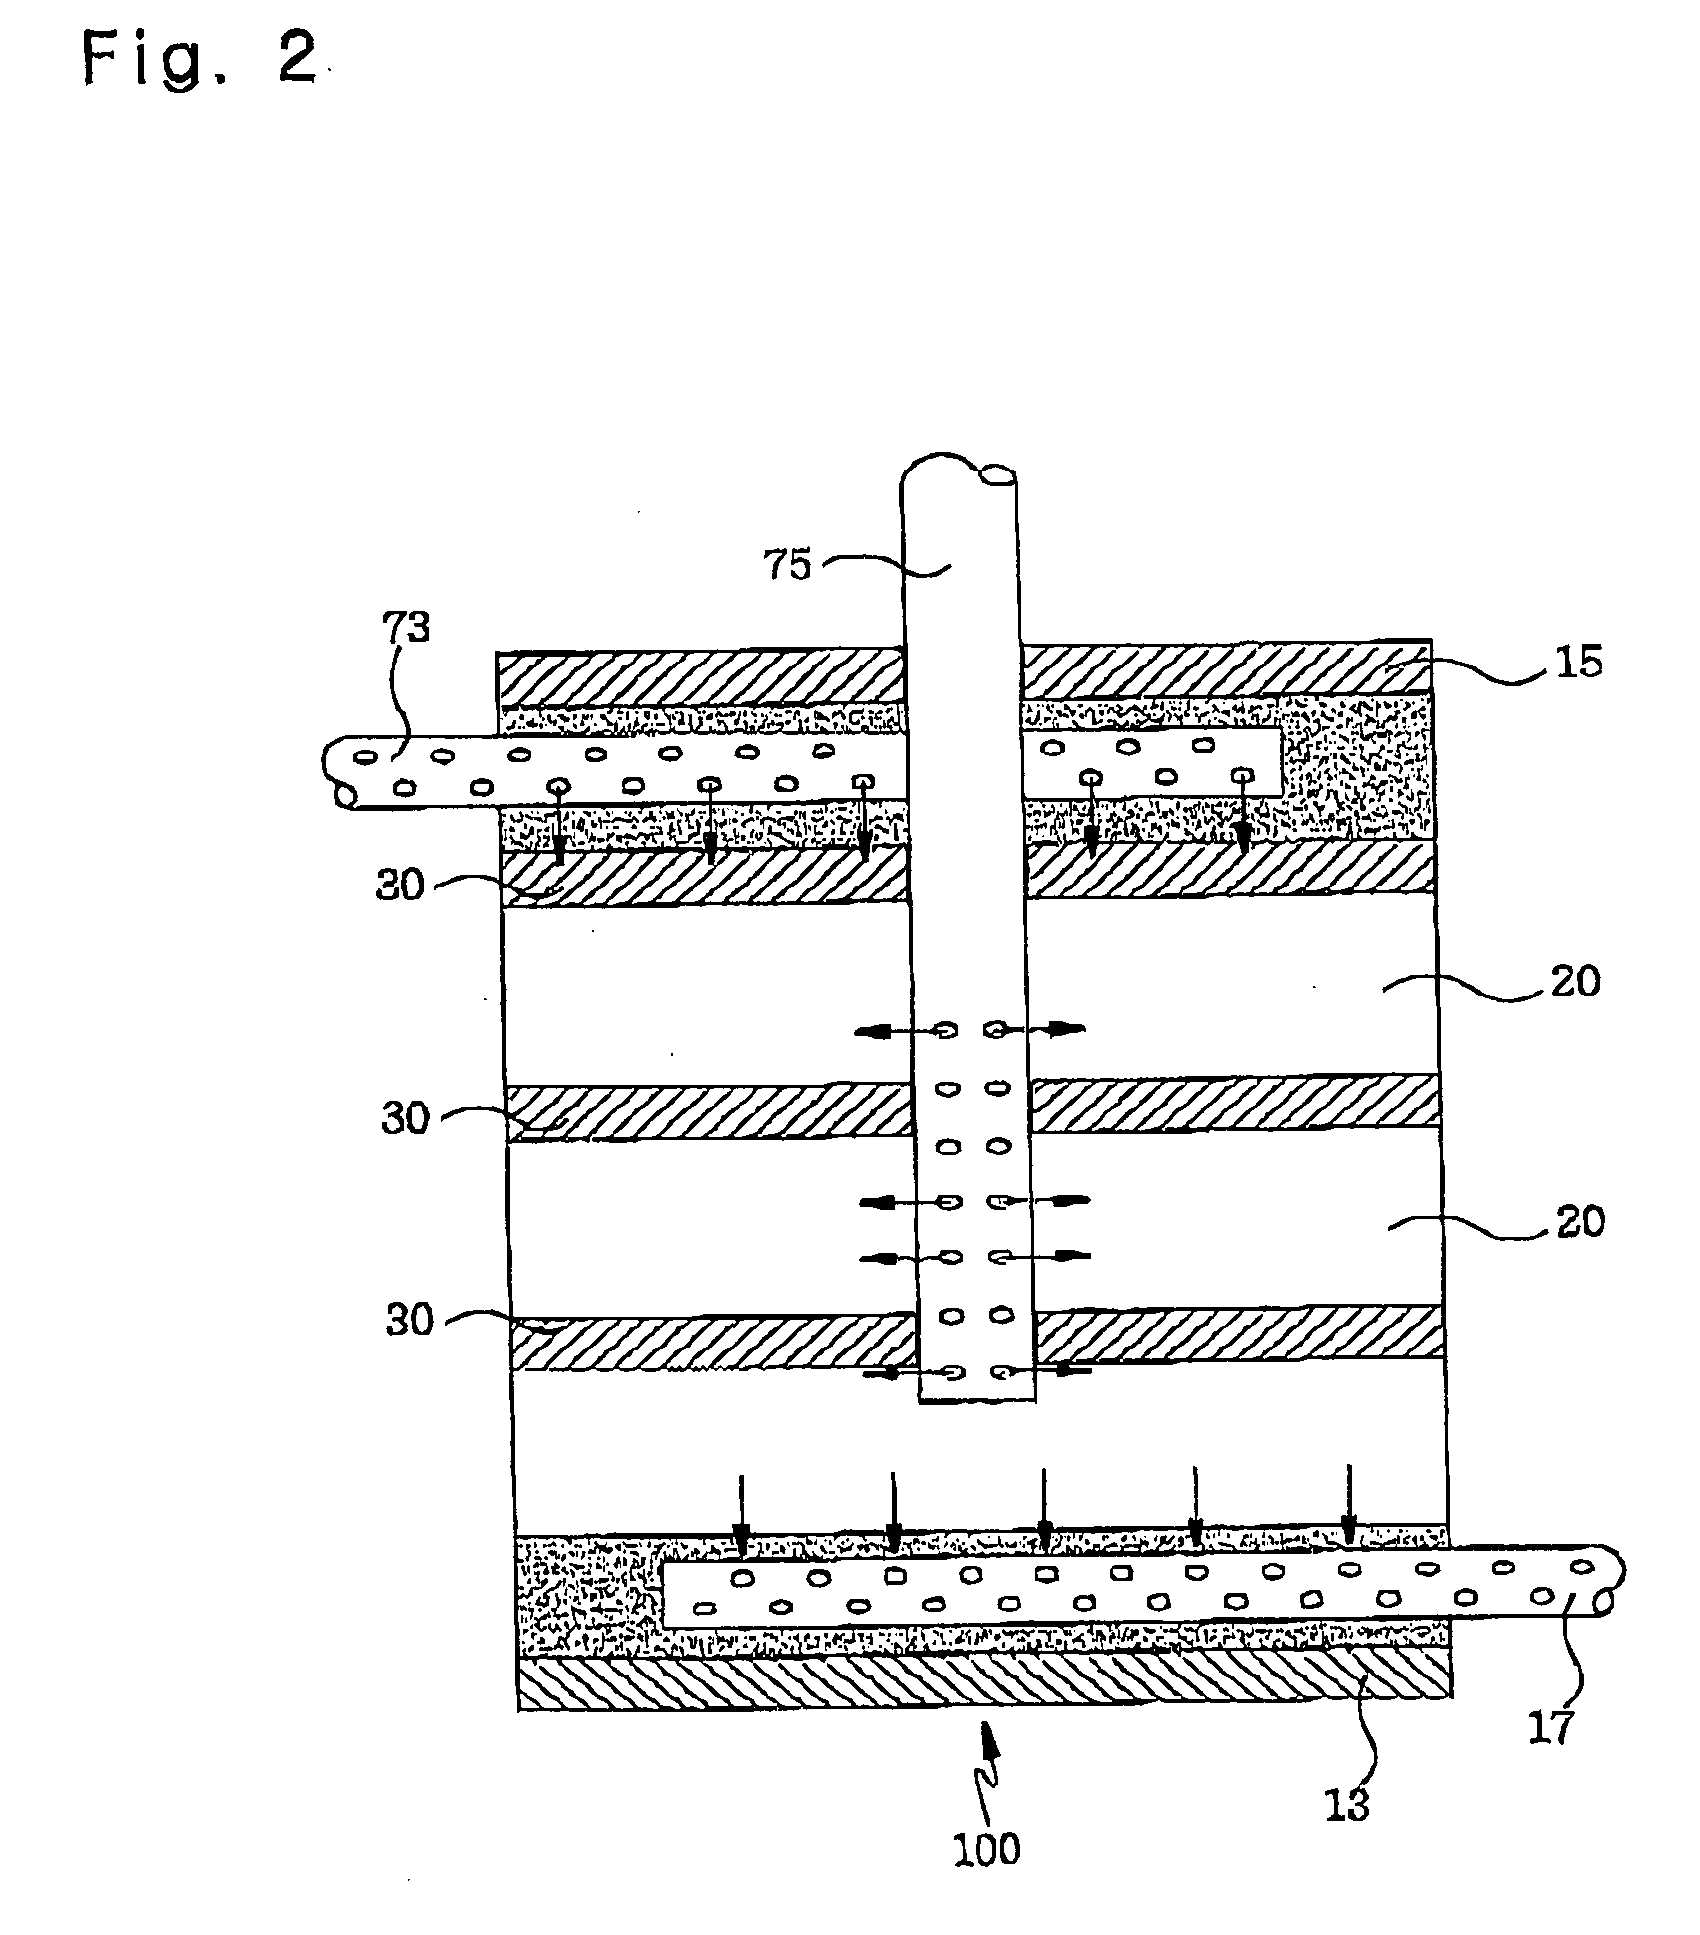 Landfill structure using concept of multi-layered reactors and method for operating the same